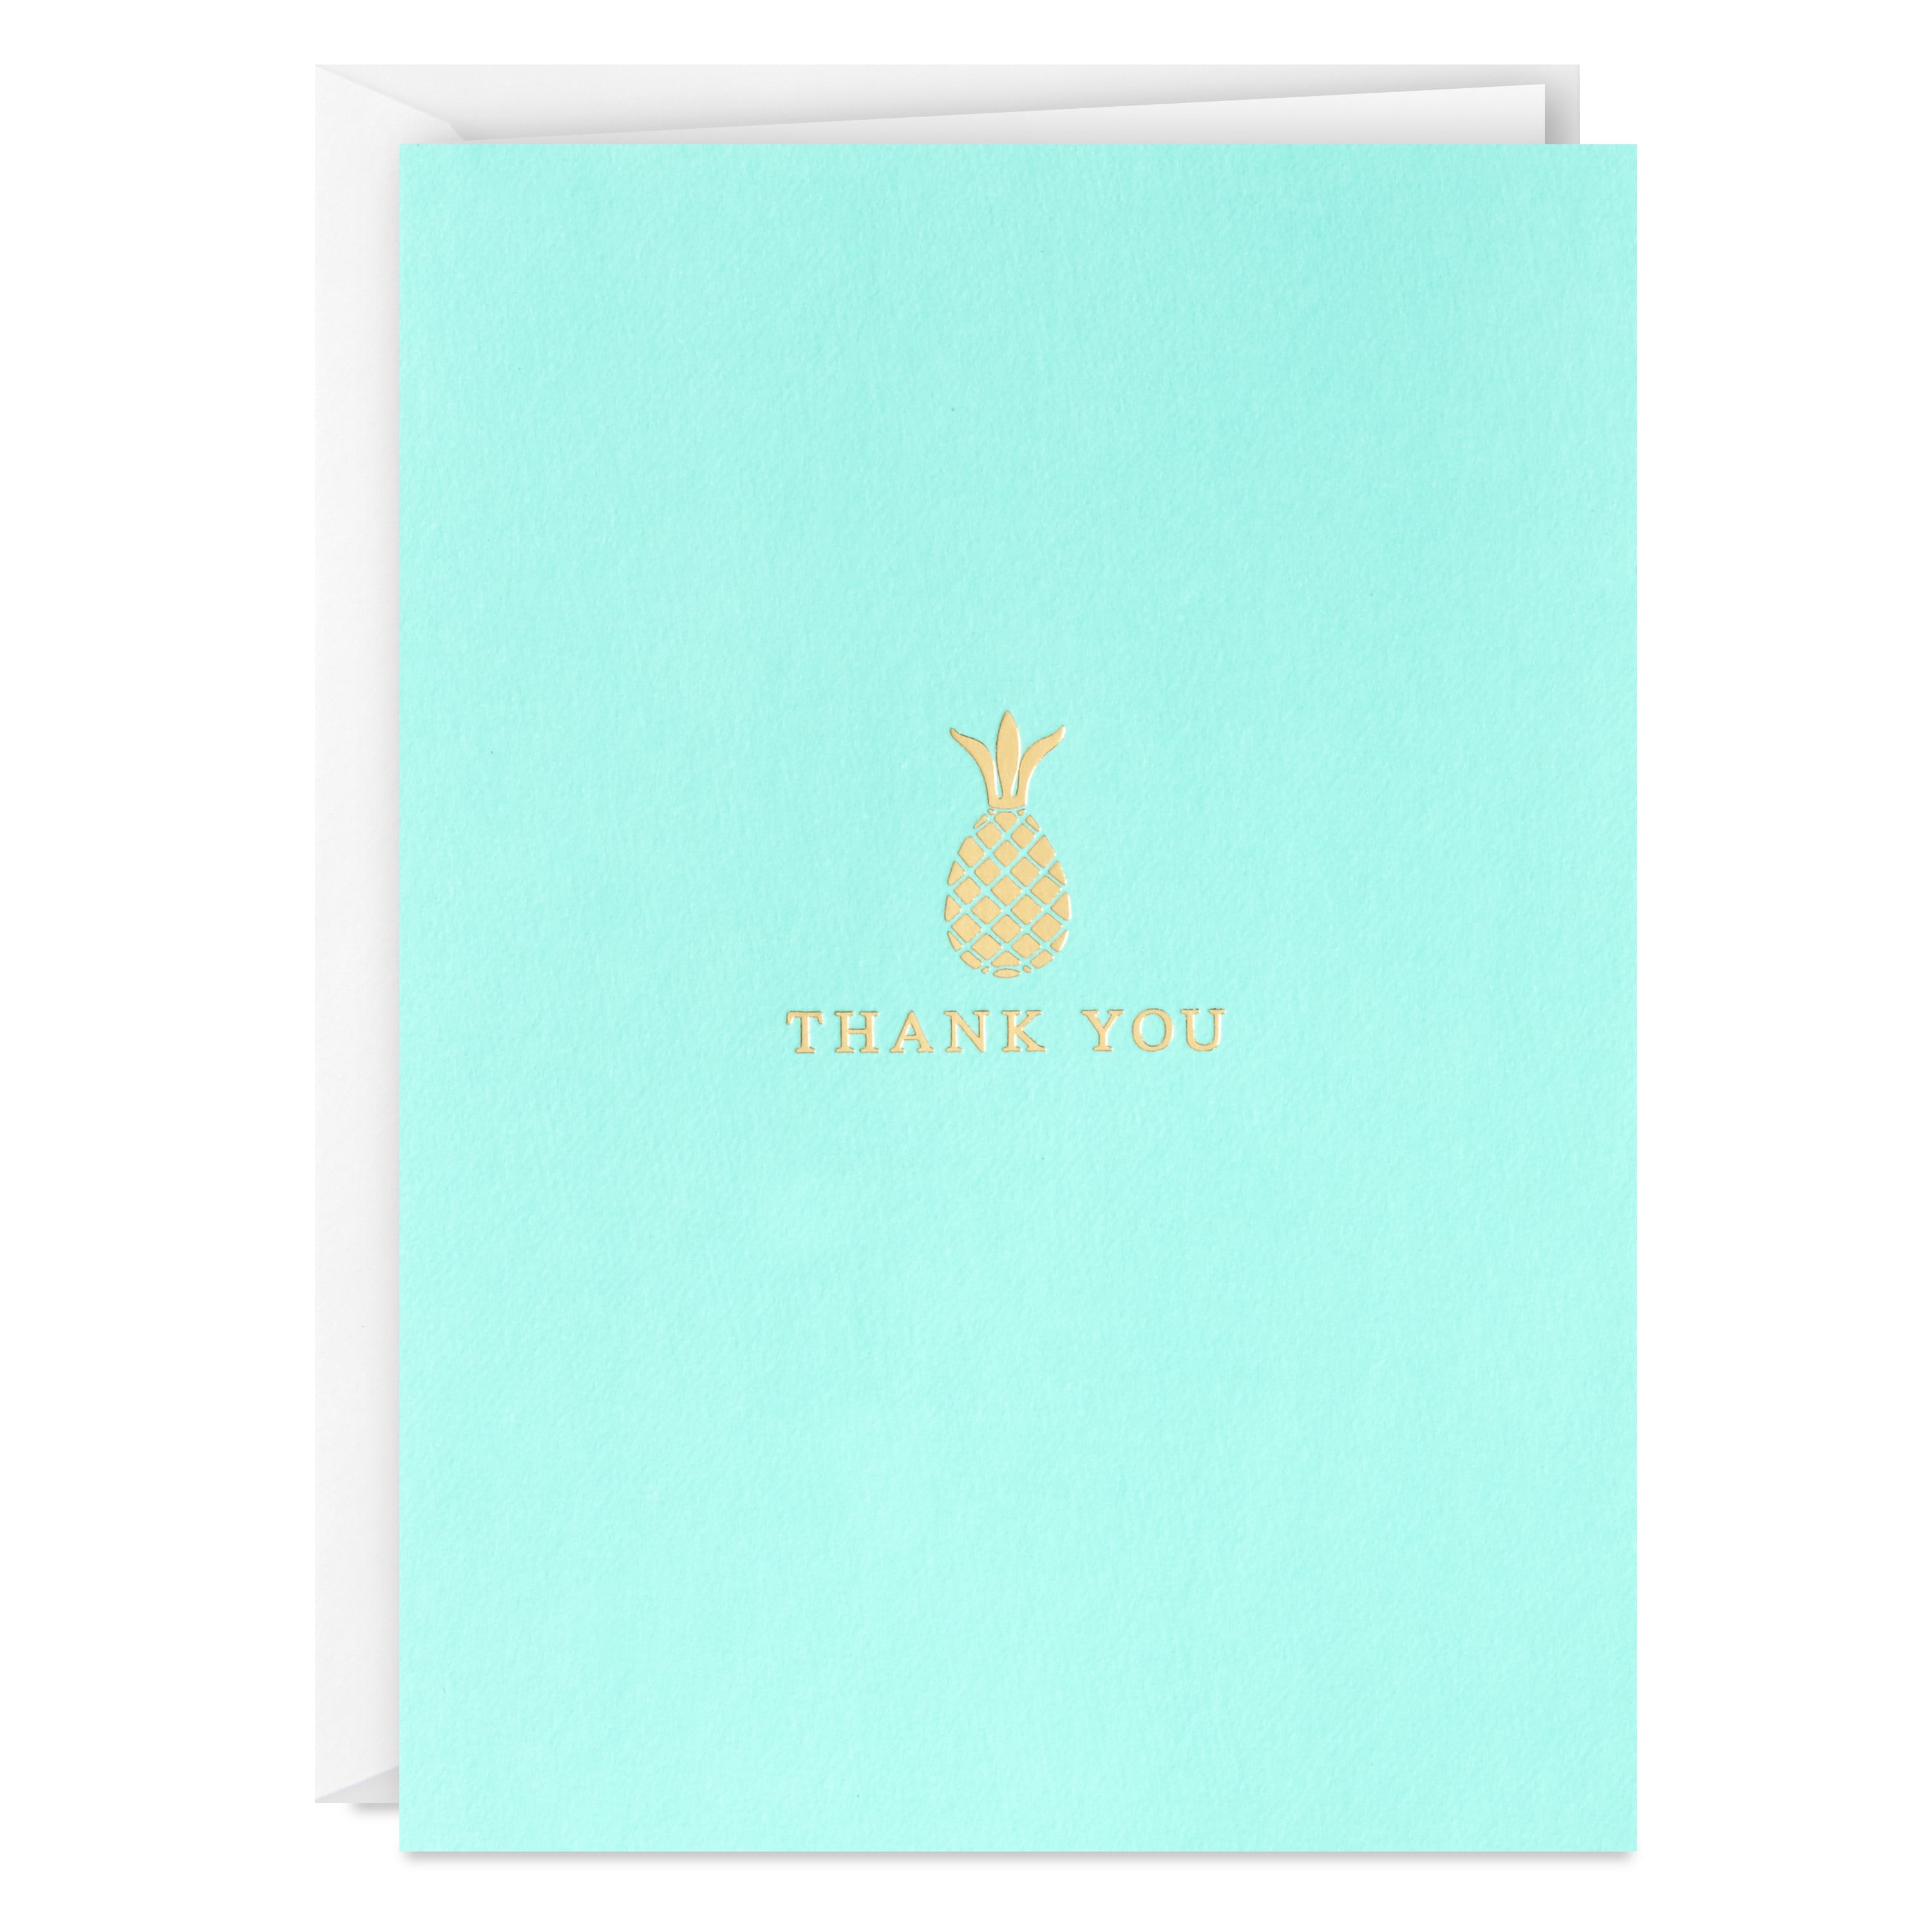 Hallmark Blank Thank-You Notes, Gold Pineapple, 12 ct.